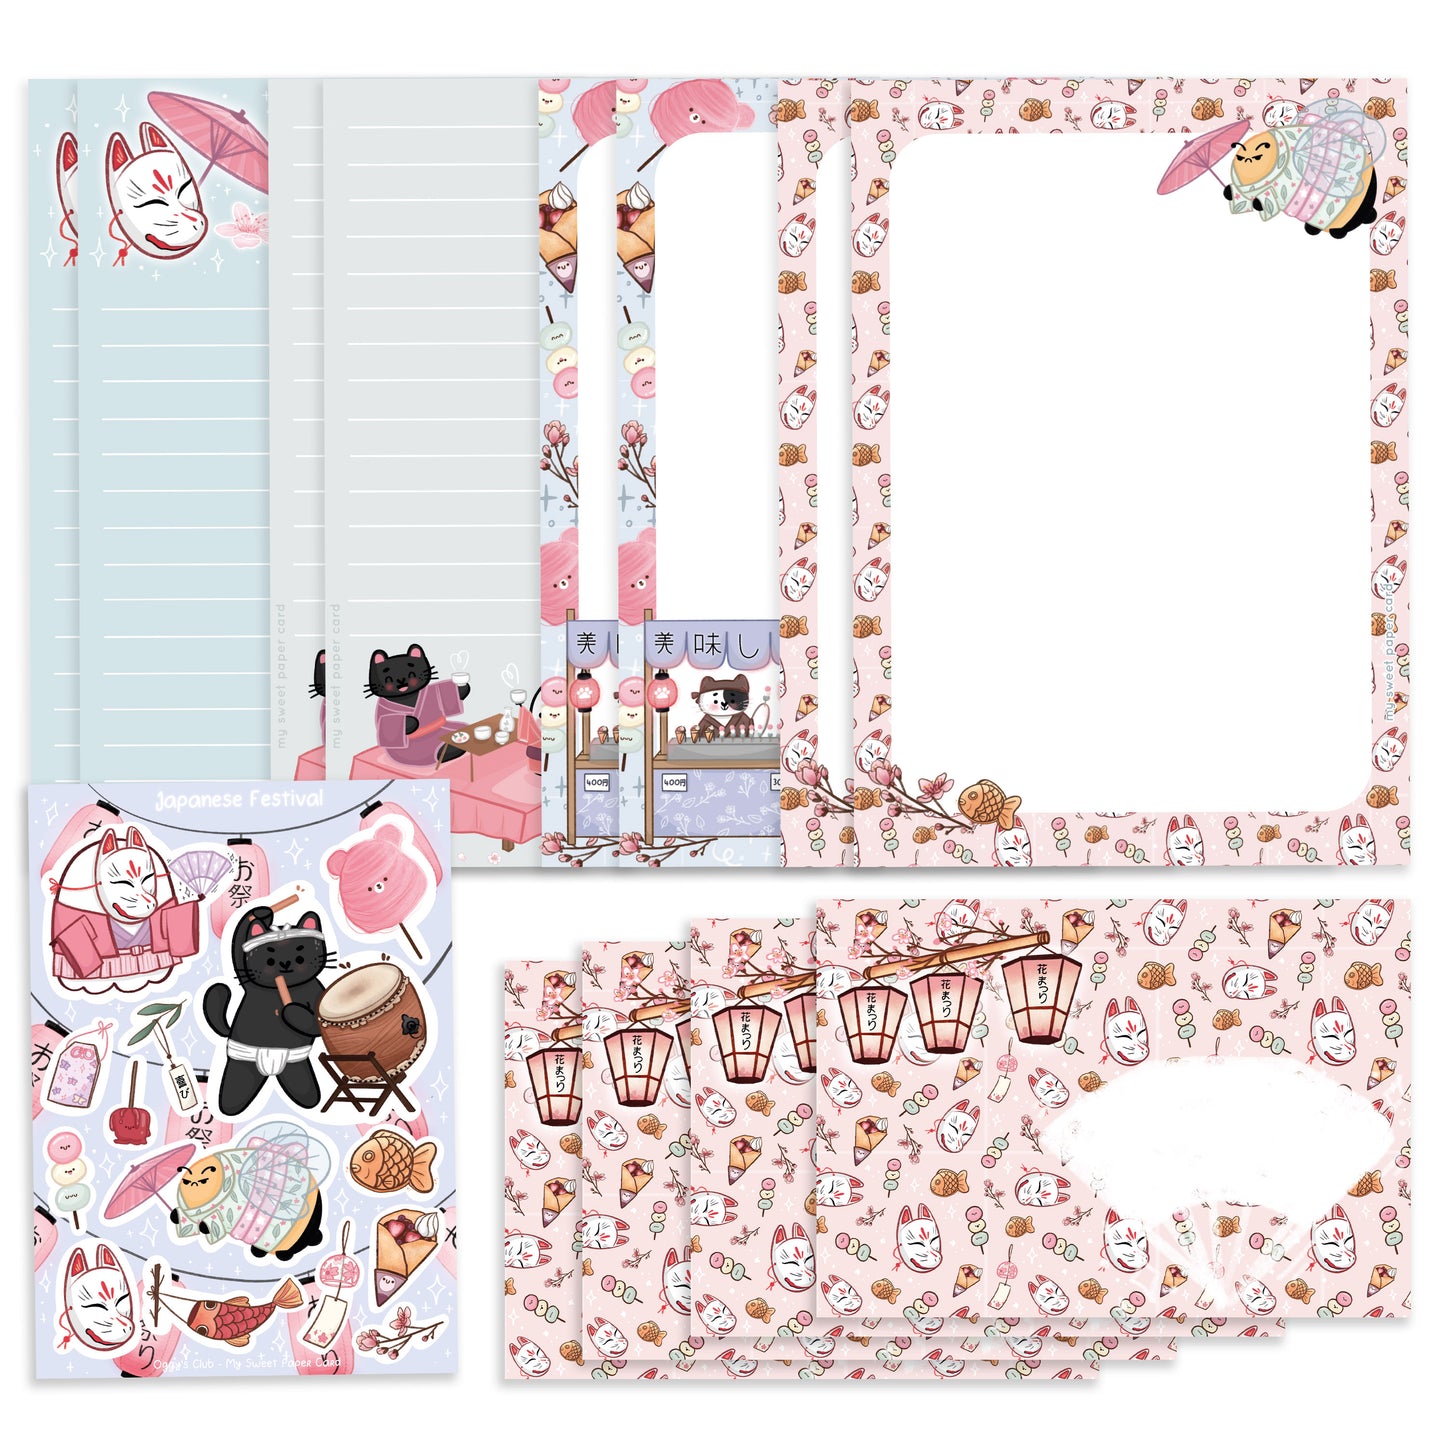 Japanese Festival - Letter writing set - Writing papers, stickers and envelopes